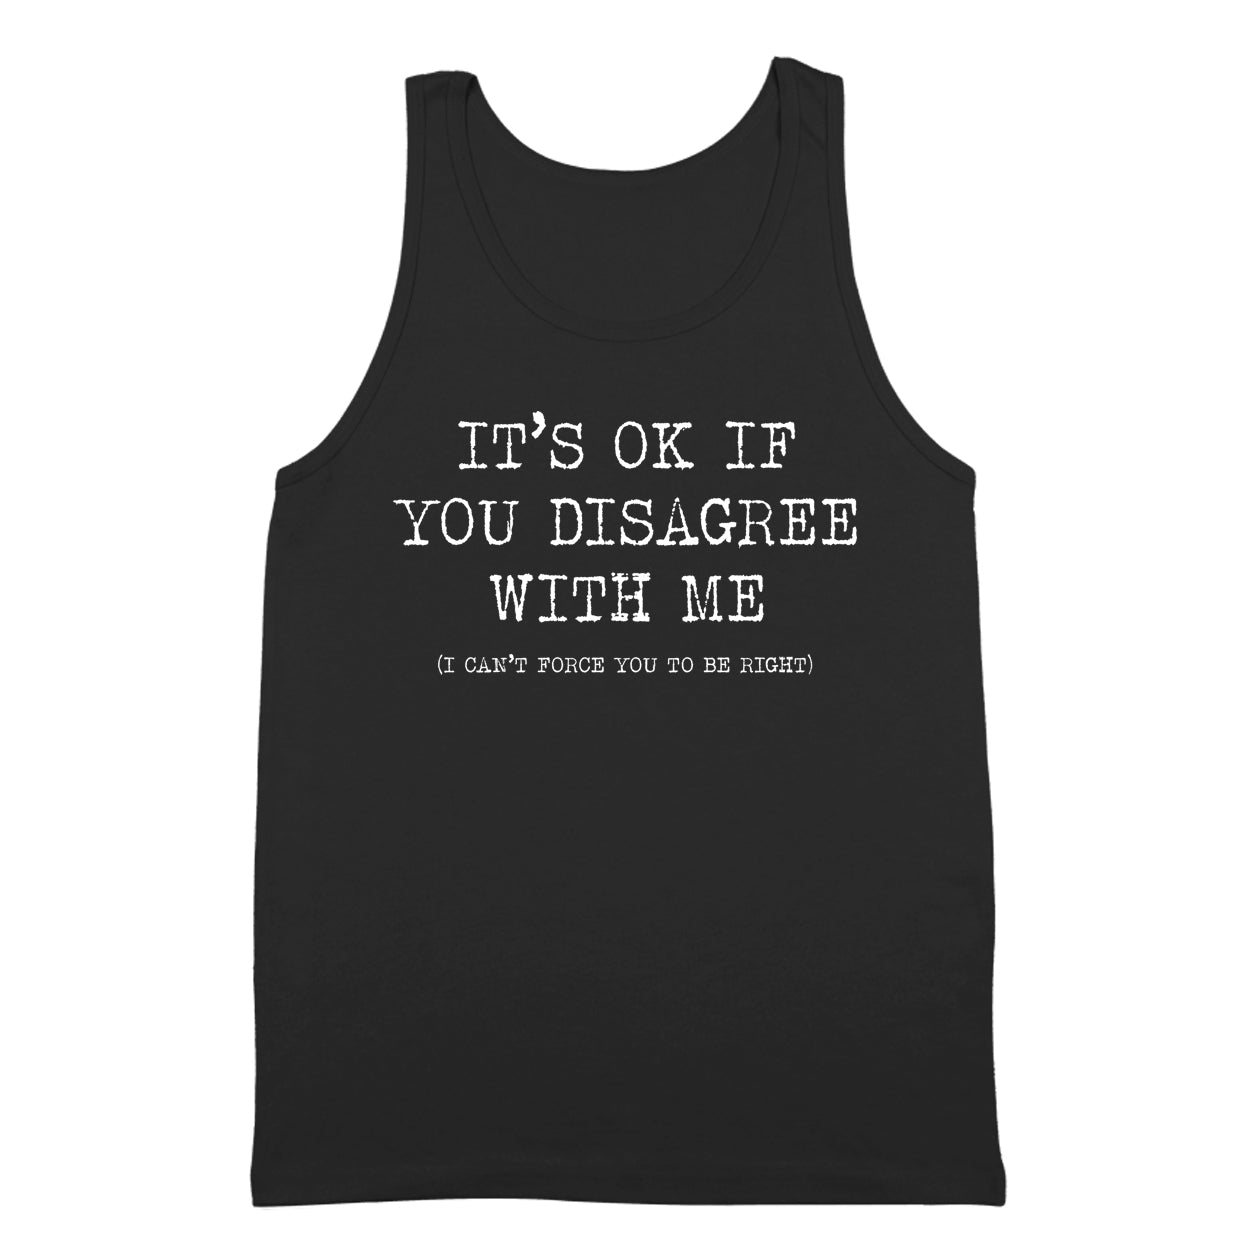 It's Ok If You Disagree With Me Tshirt - Donkey Tees